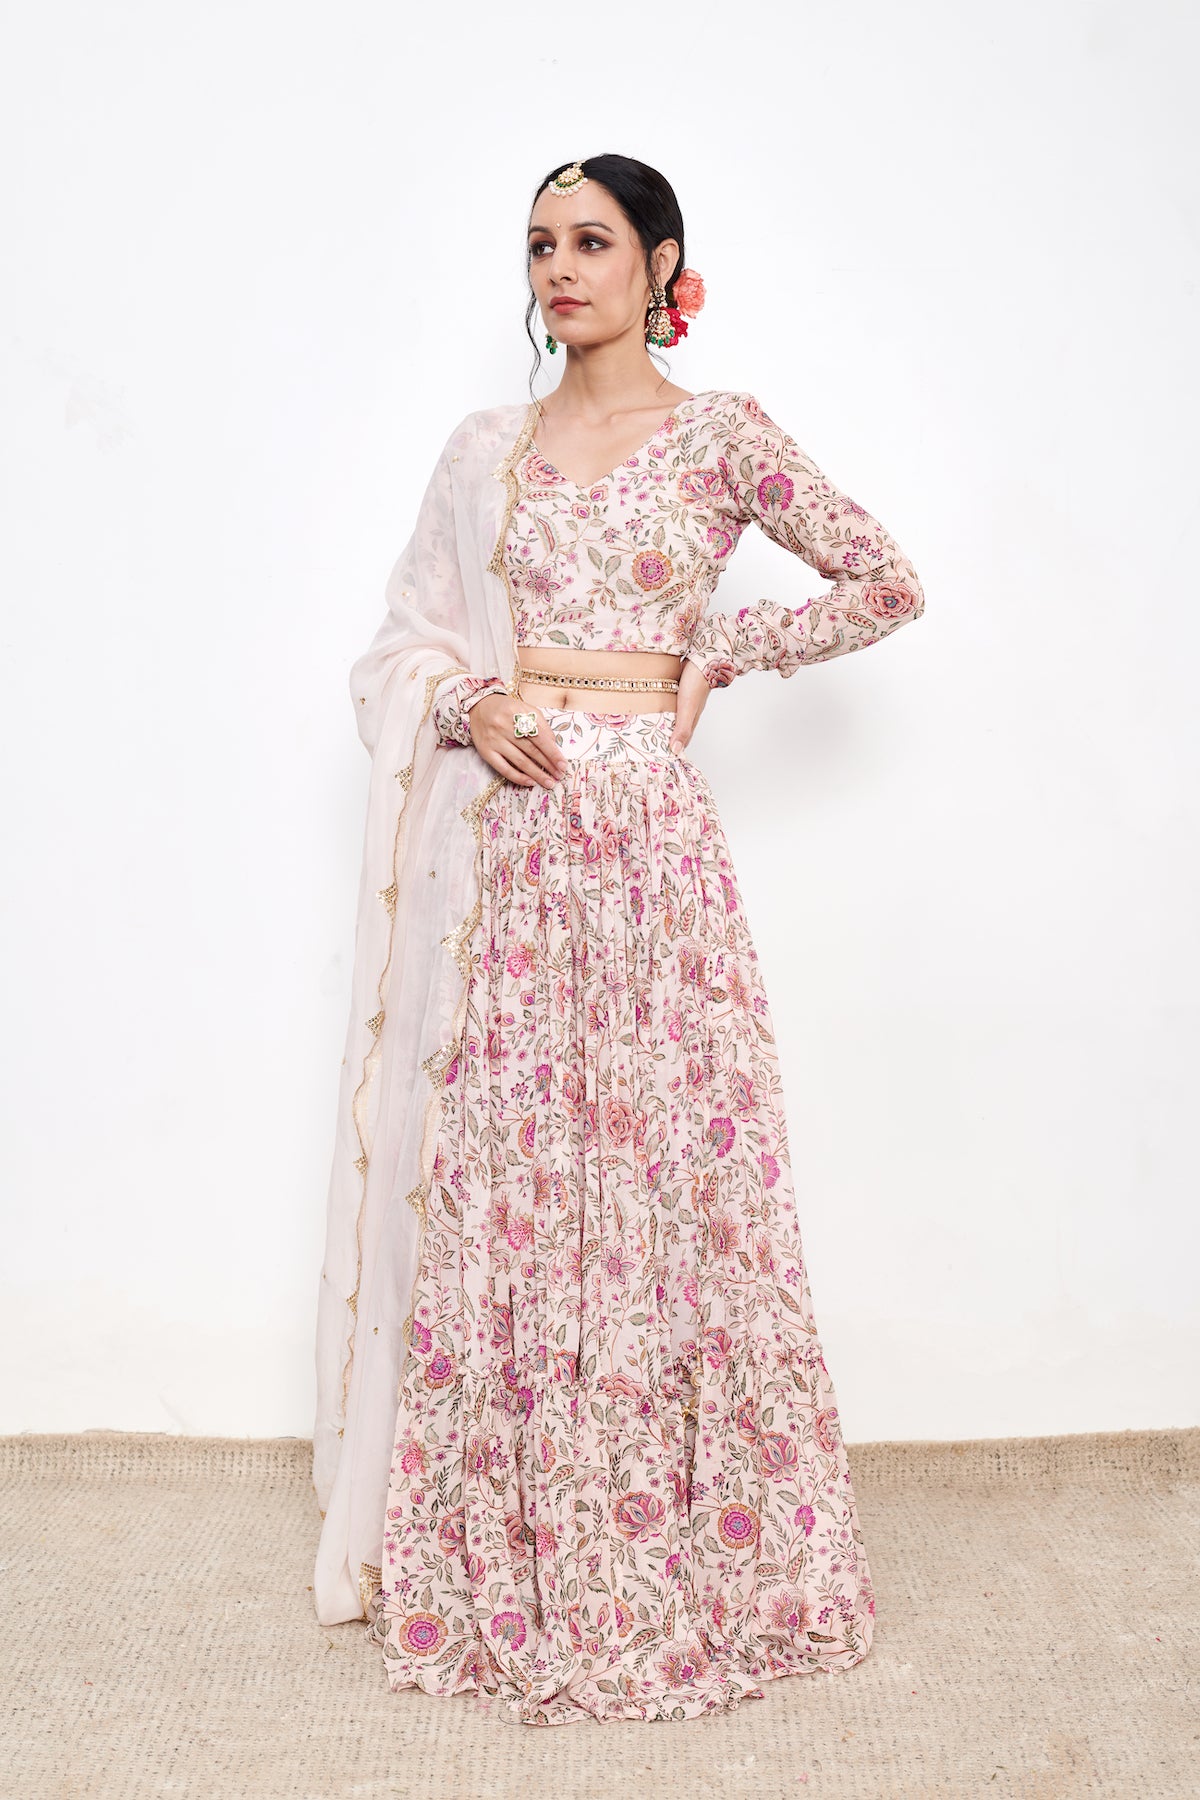 Raag Daisy White Floral print Lehenga with Floral print Blouse and Dupatta - Set of 3